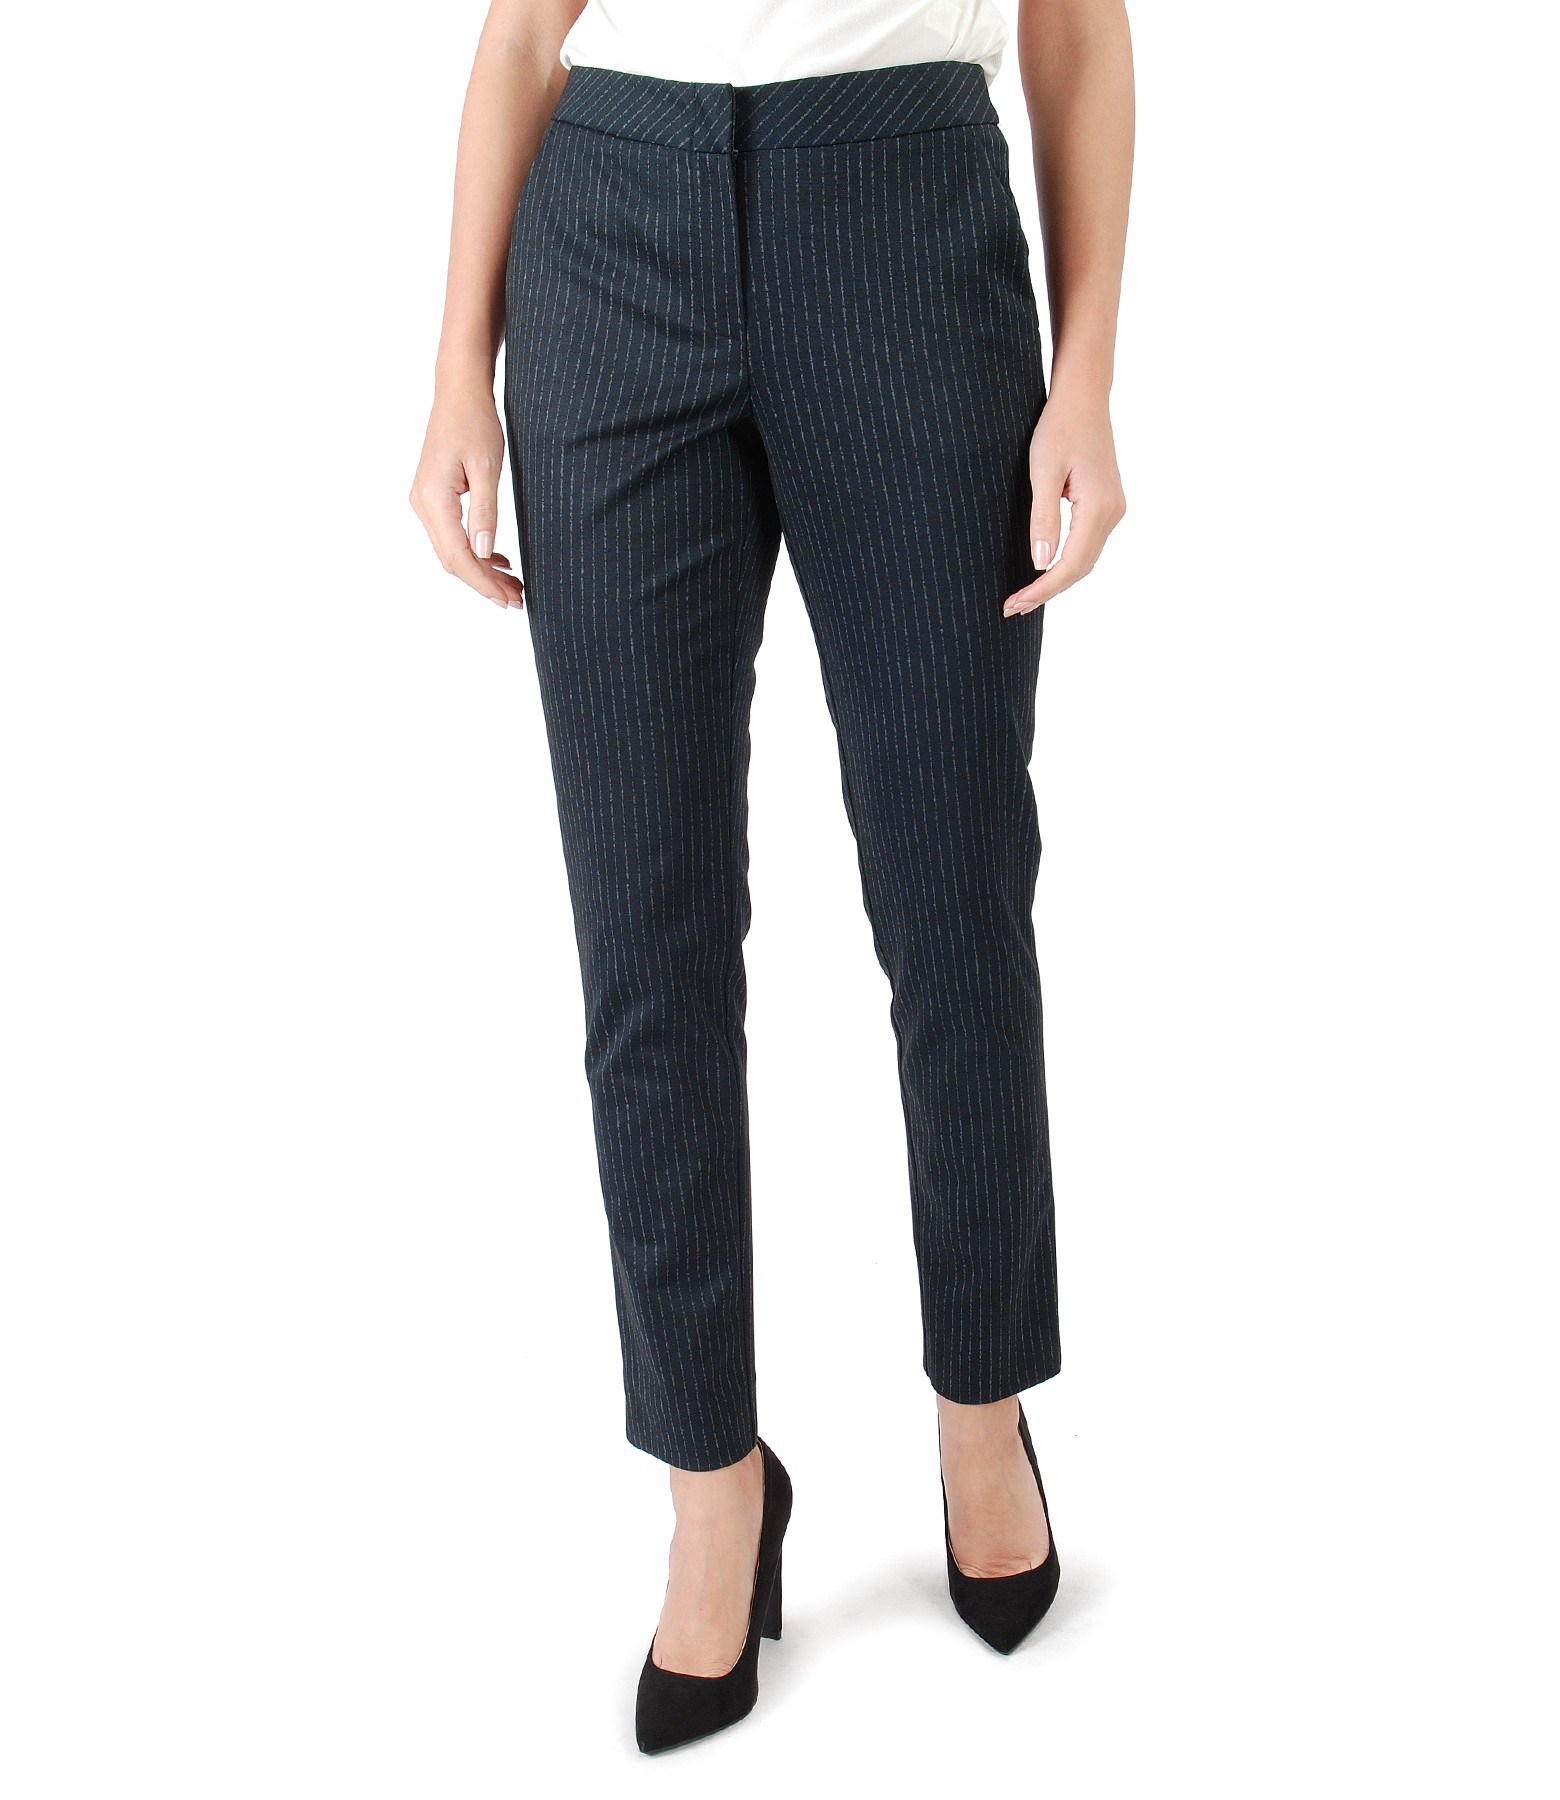 Trousers made of thick elastic jersey with stripes petrol grey - YOKKO